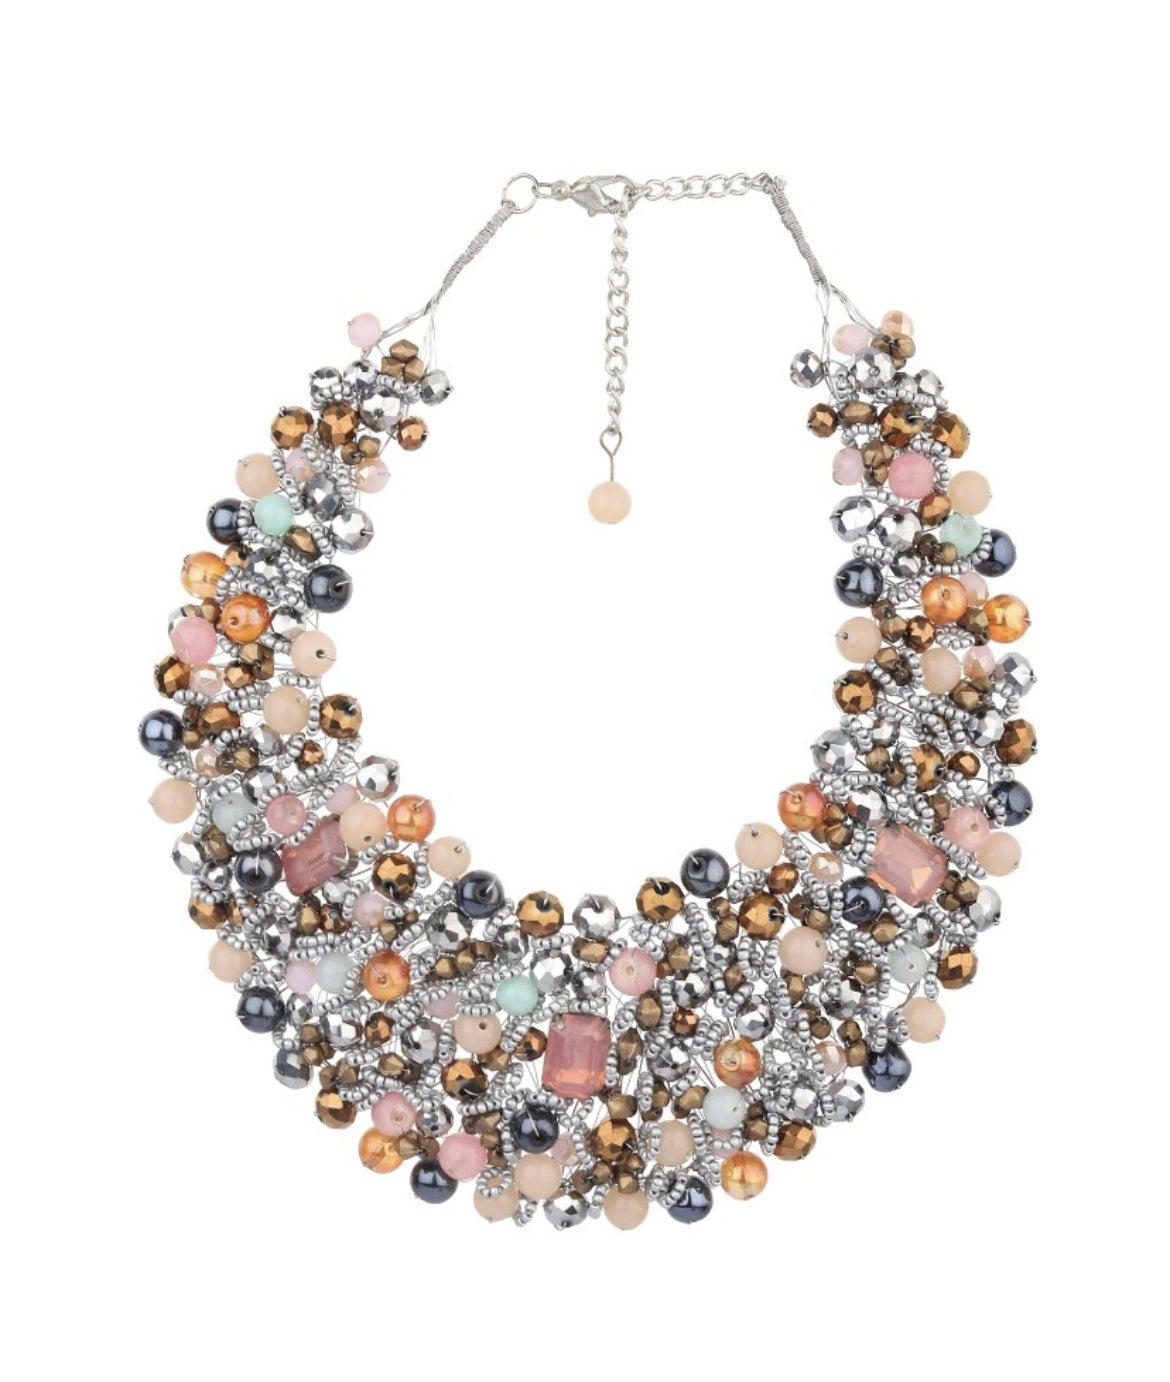 Beaded Statement Necklace